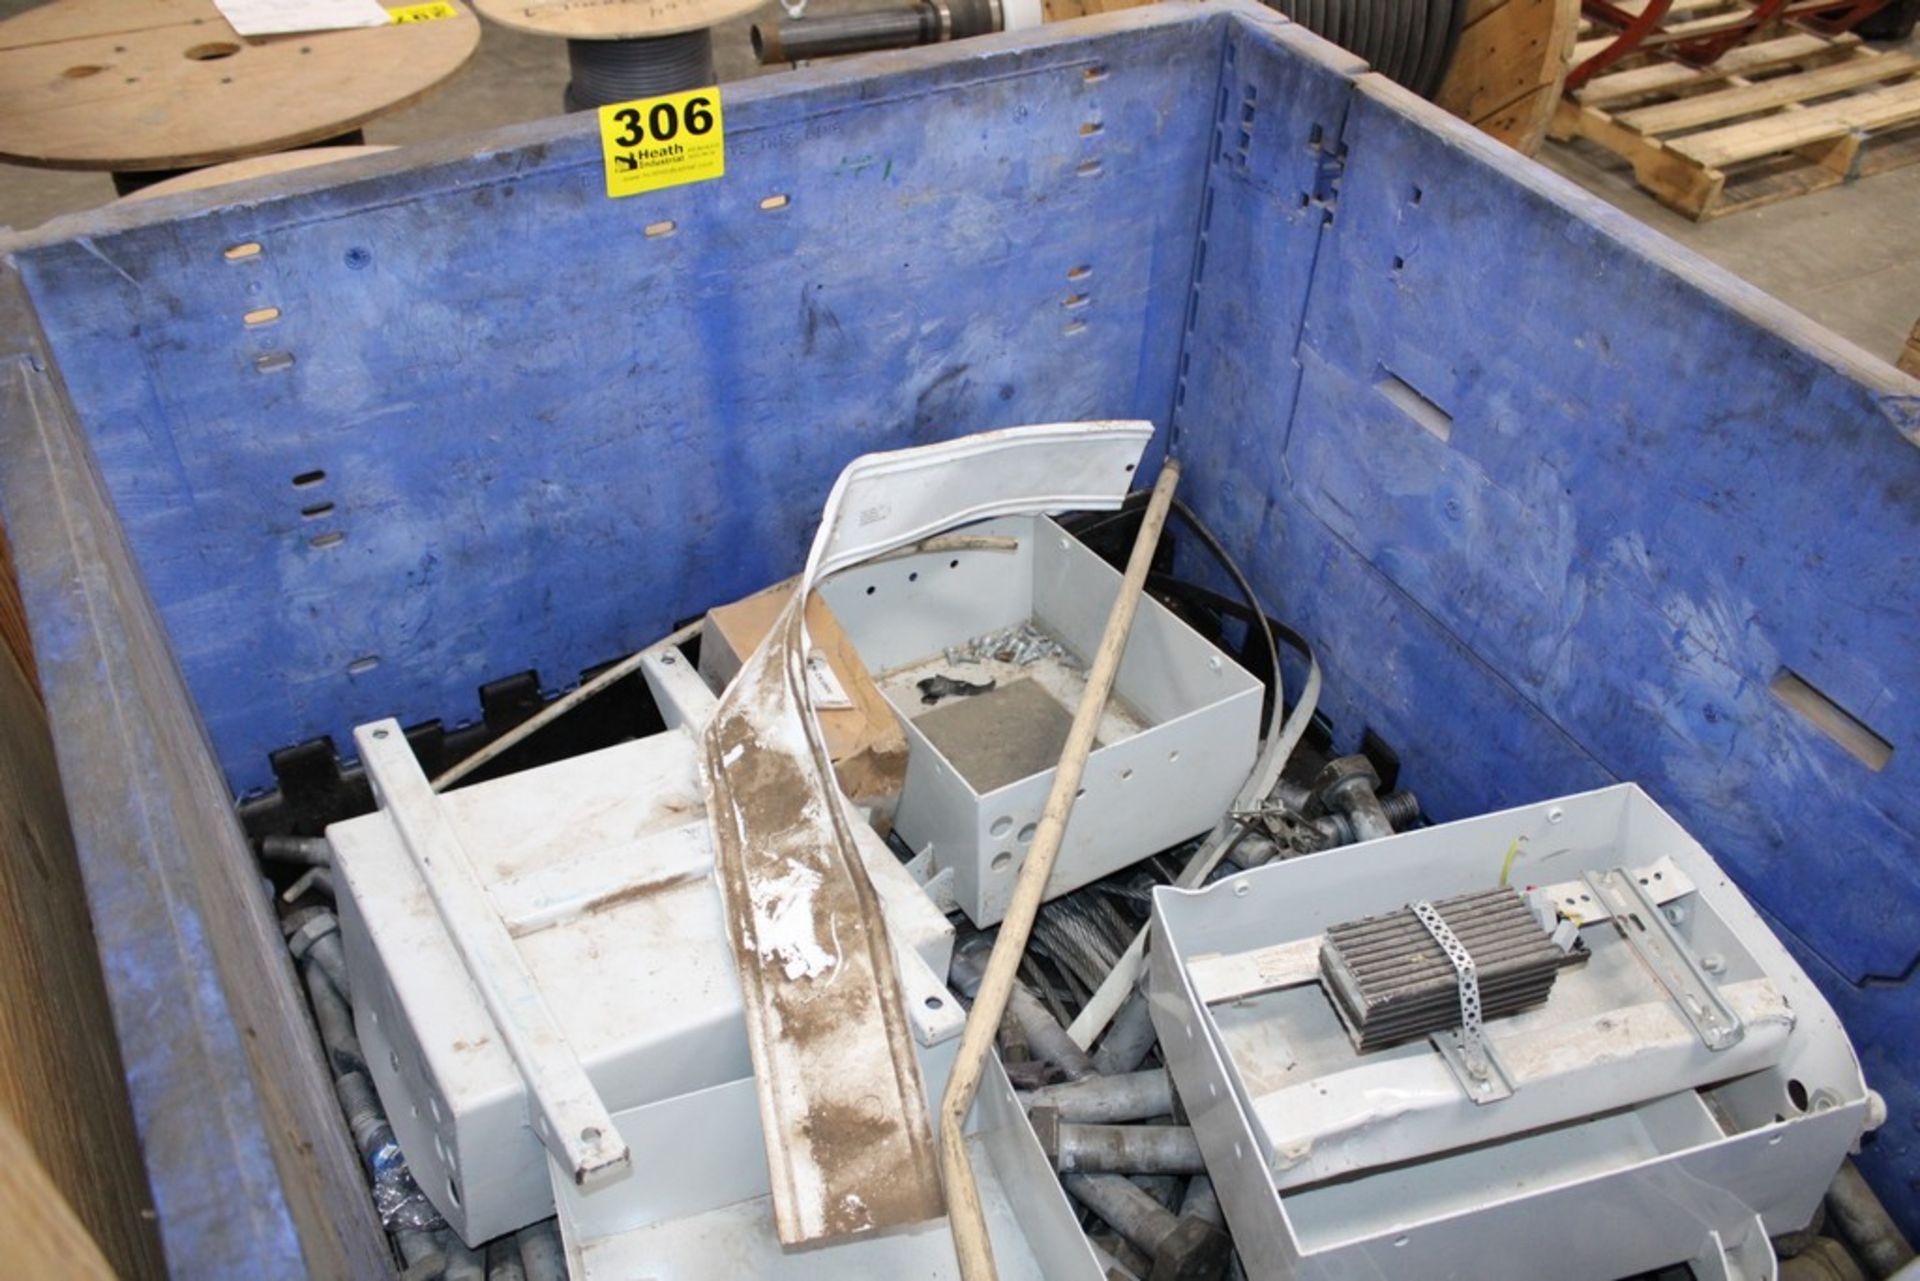 ASSORTED RECYCLABLE MATERIALS IN CRATE